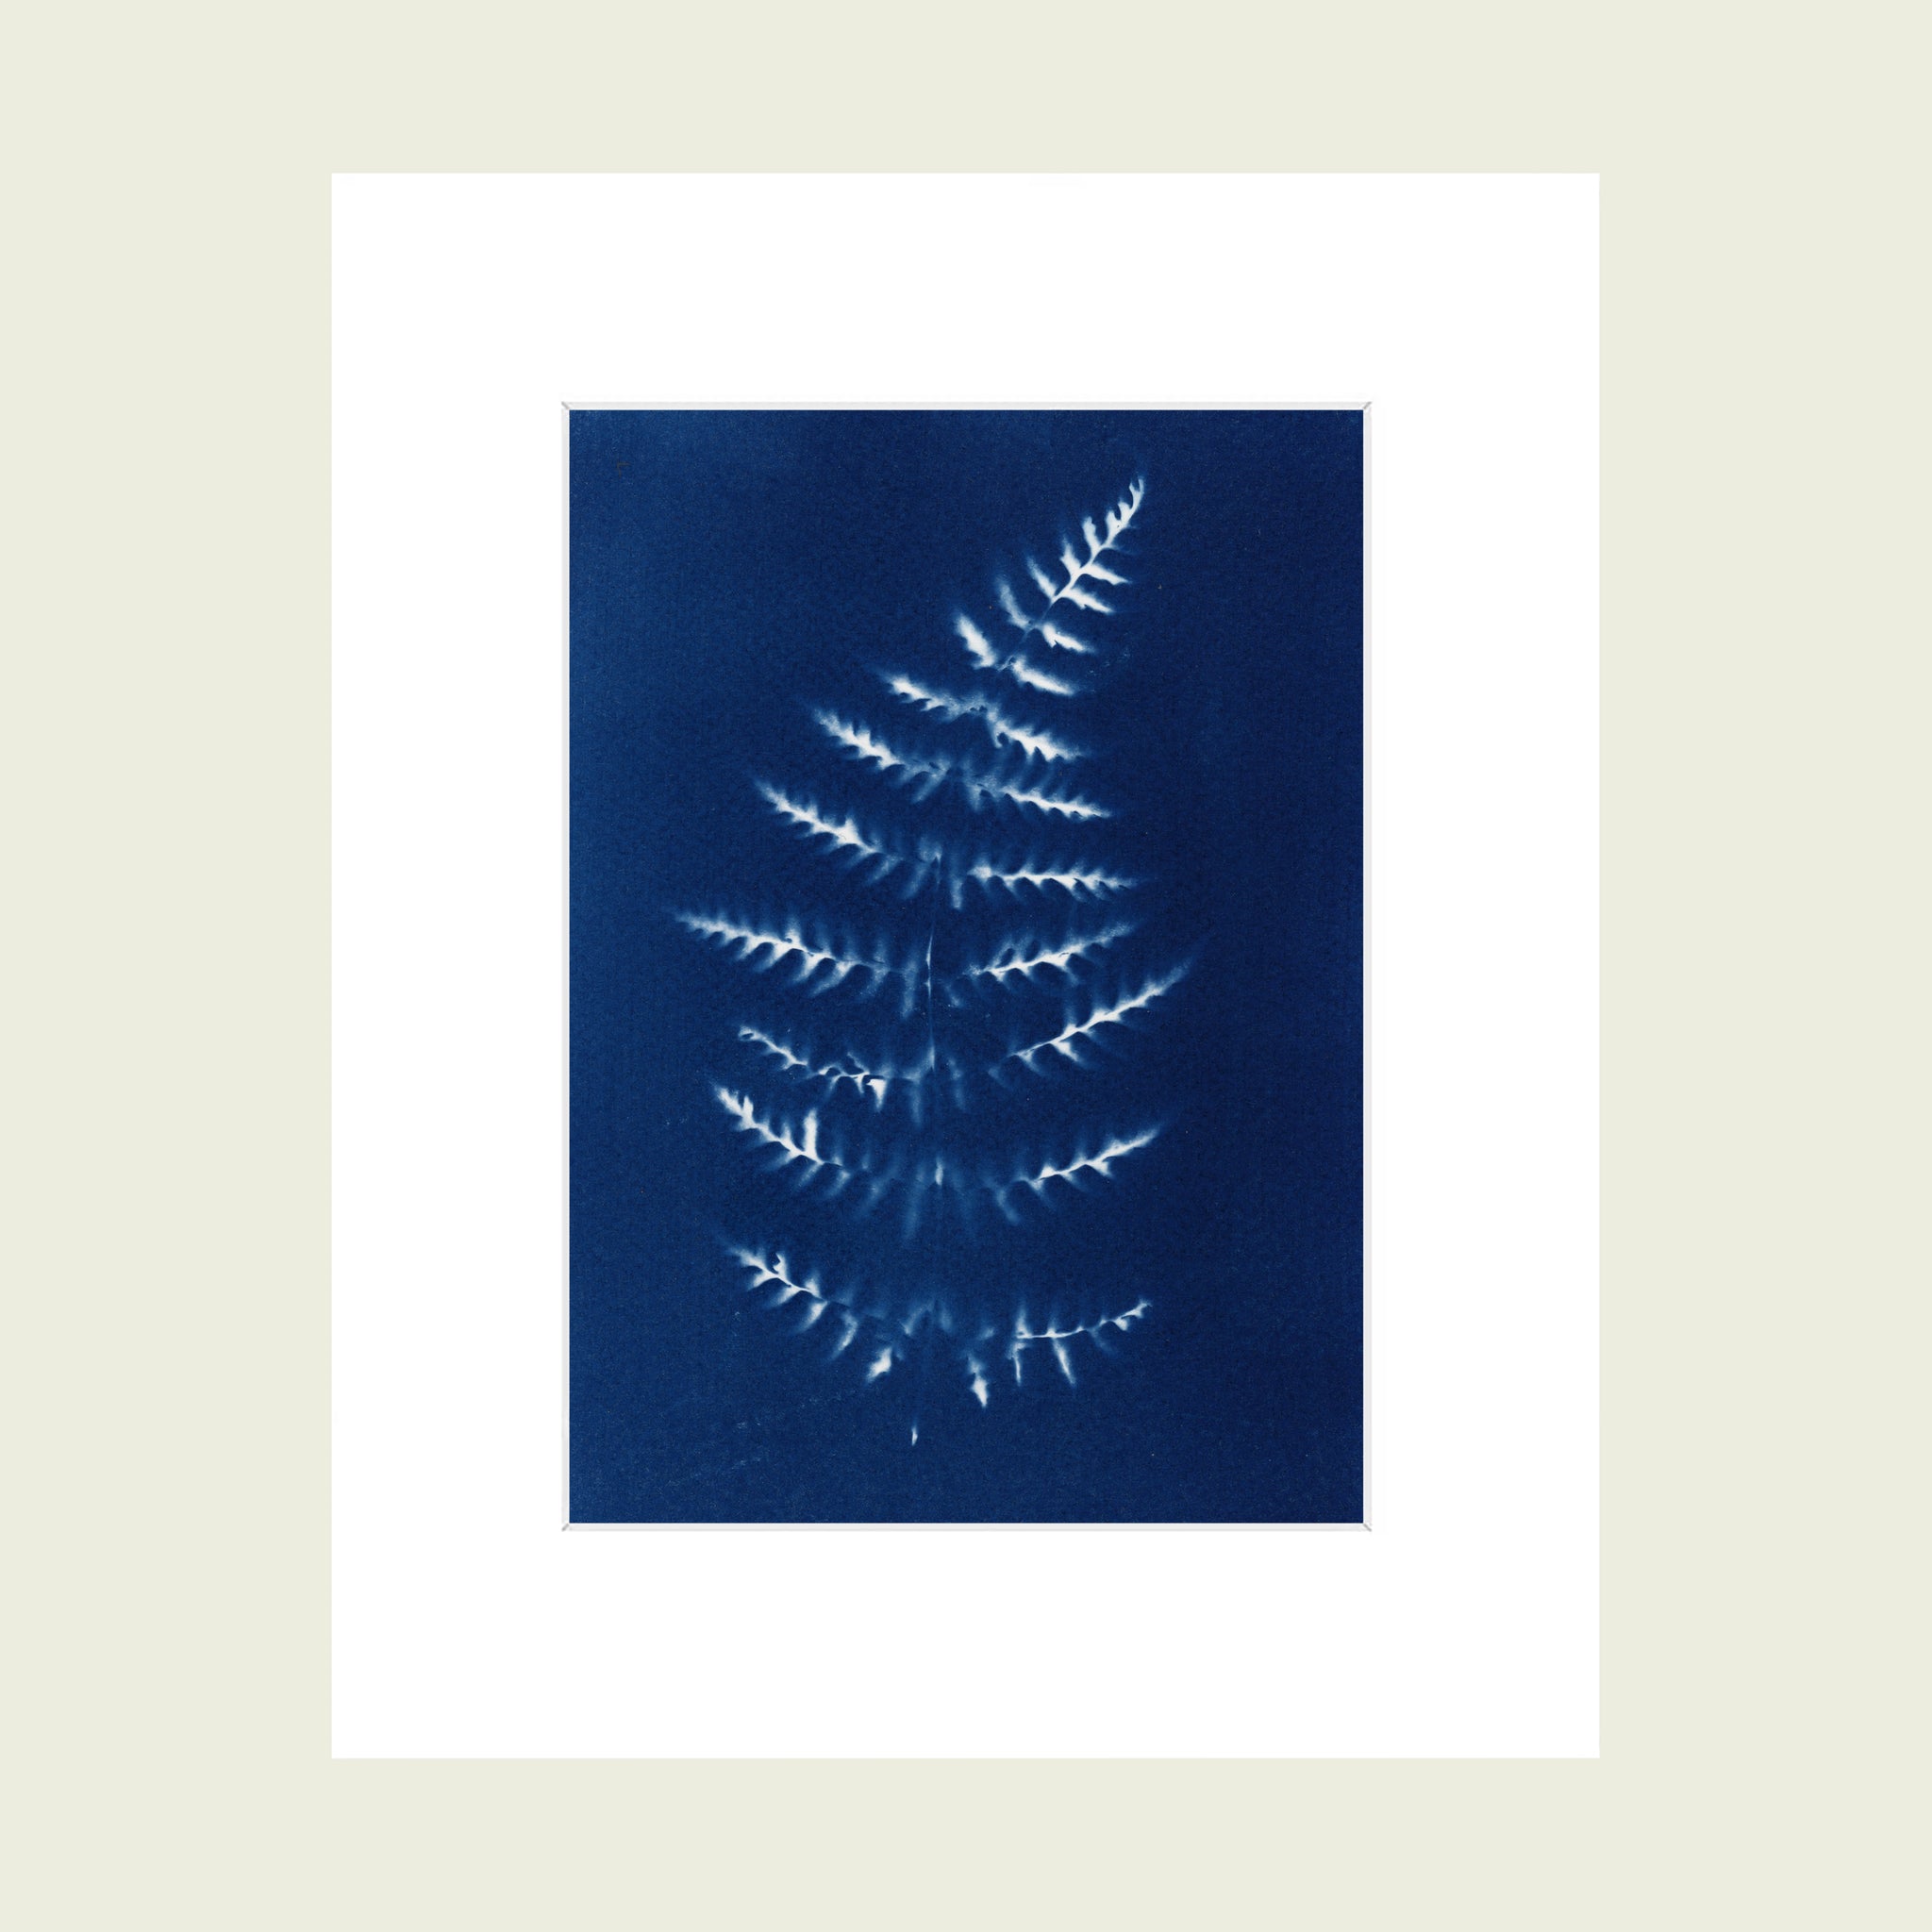 Hand printed blue cyanotype art on watercolour paper in a white mount